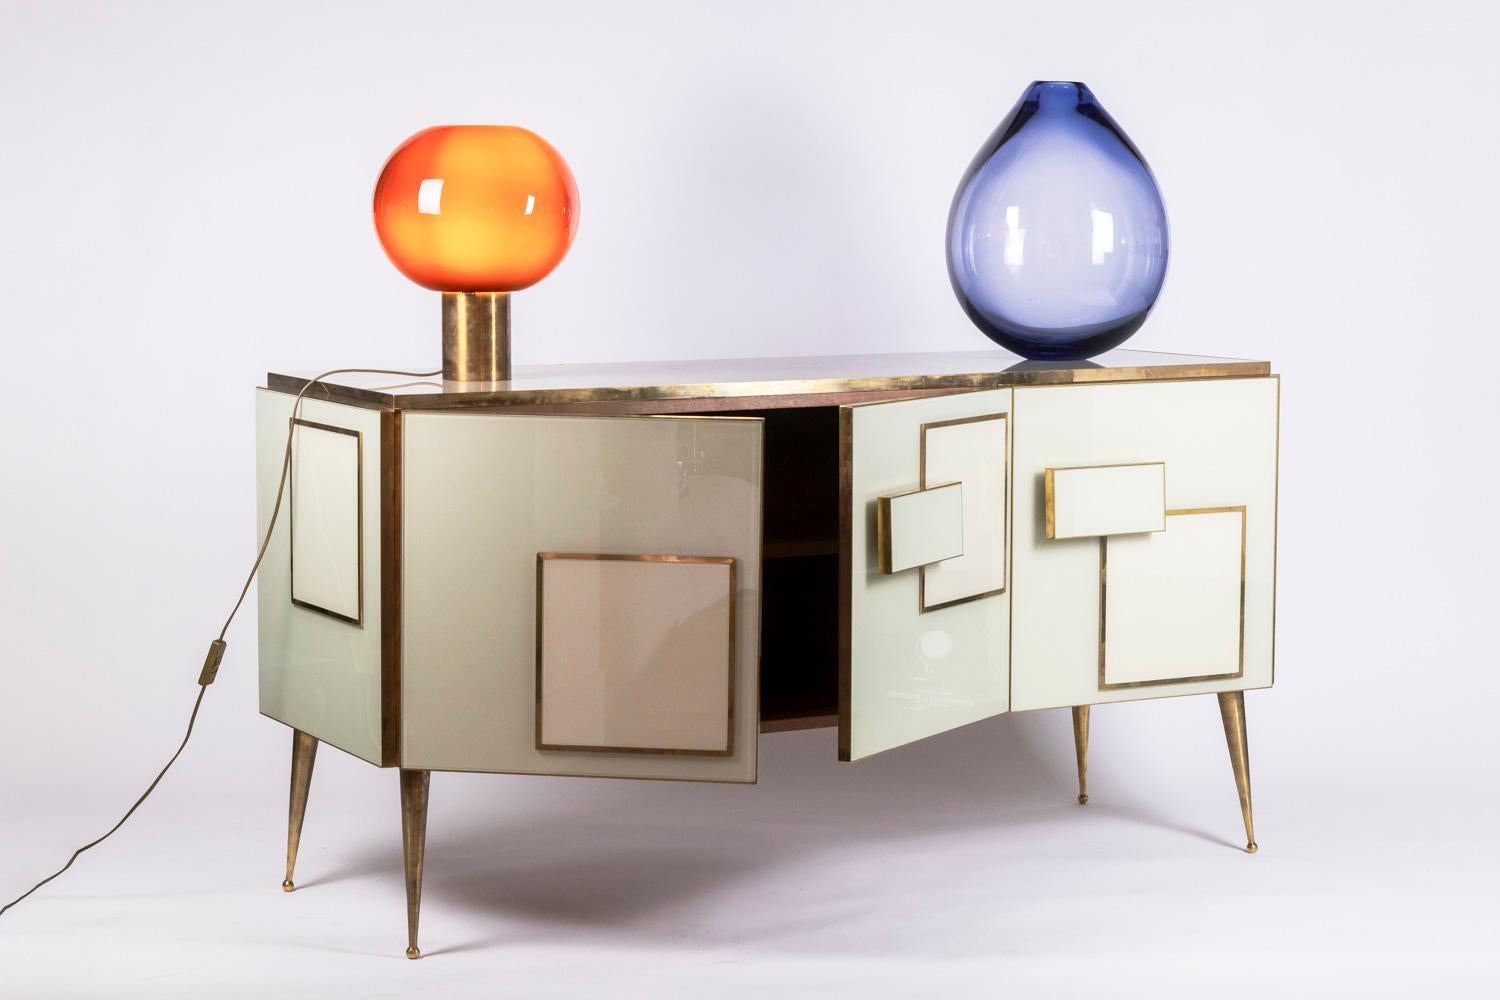 Sideboard in white colored glass and gilded brass, opening on the front with three doors and decorated with square and rectangular shapes, rectangular shapes used as handles. Spindle-shaped gilded brass base, enfing in small decorative